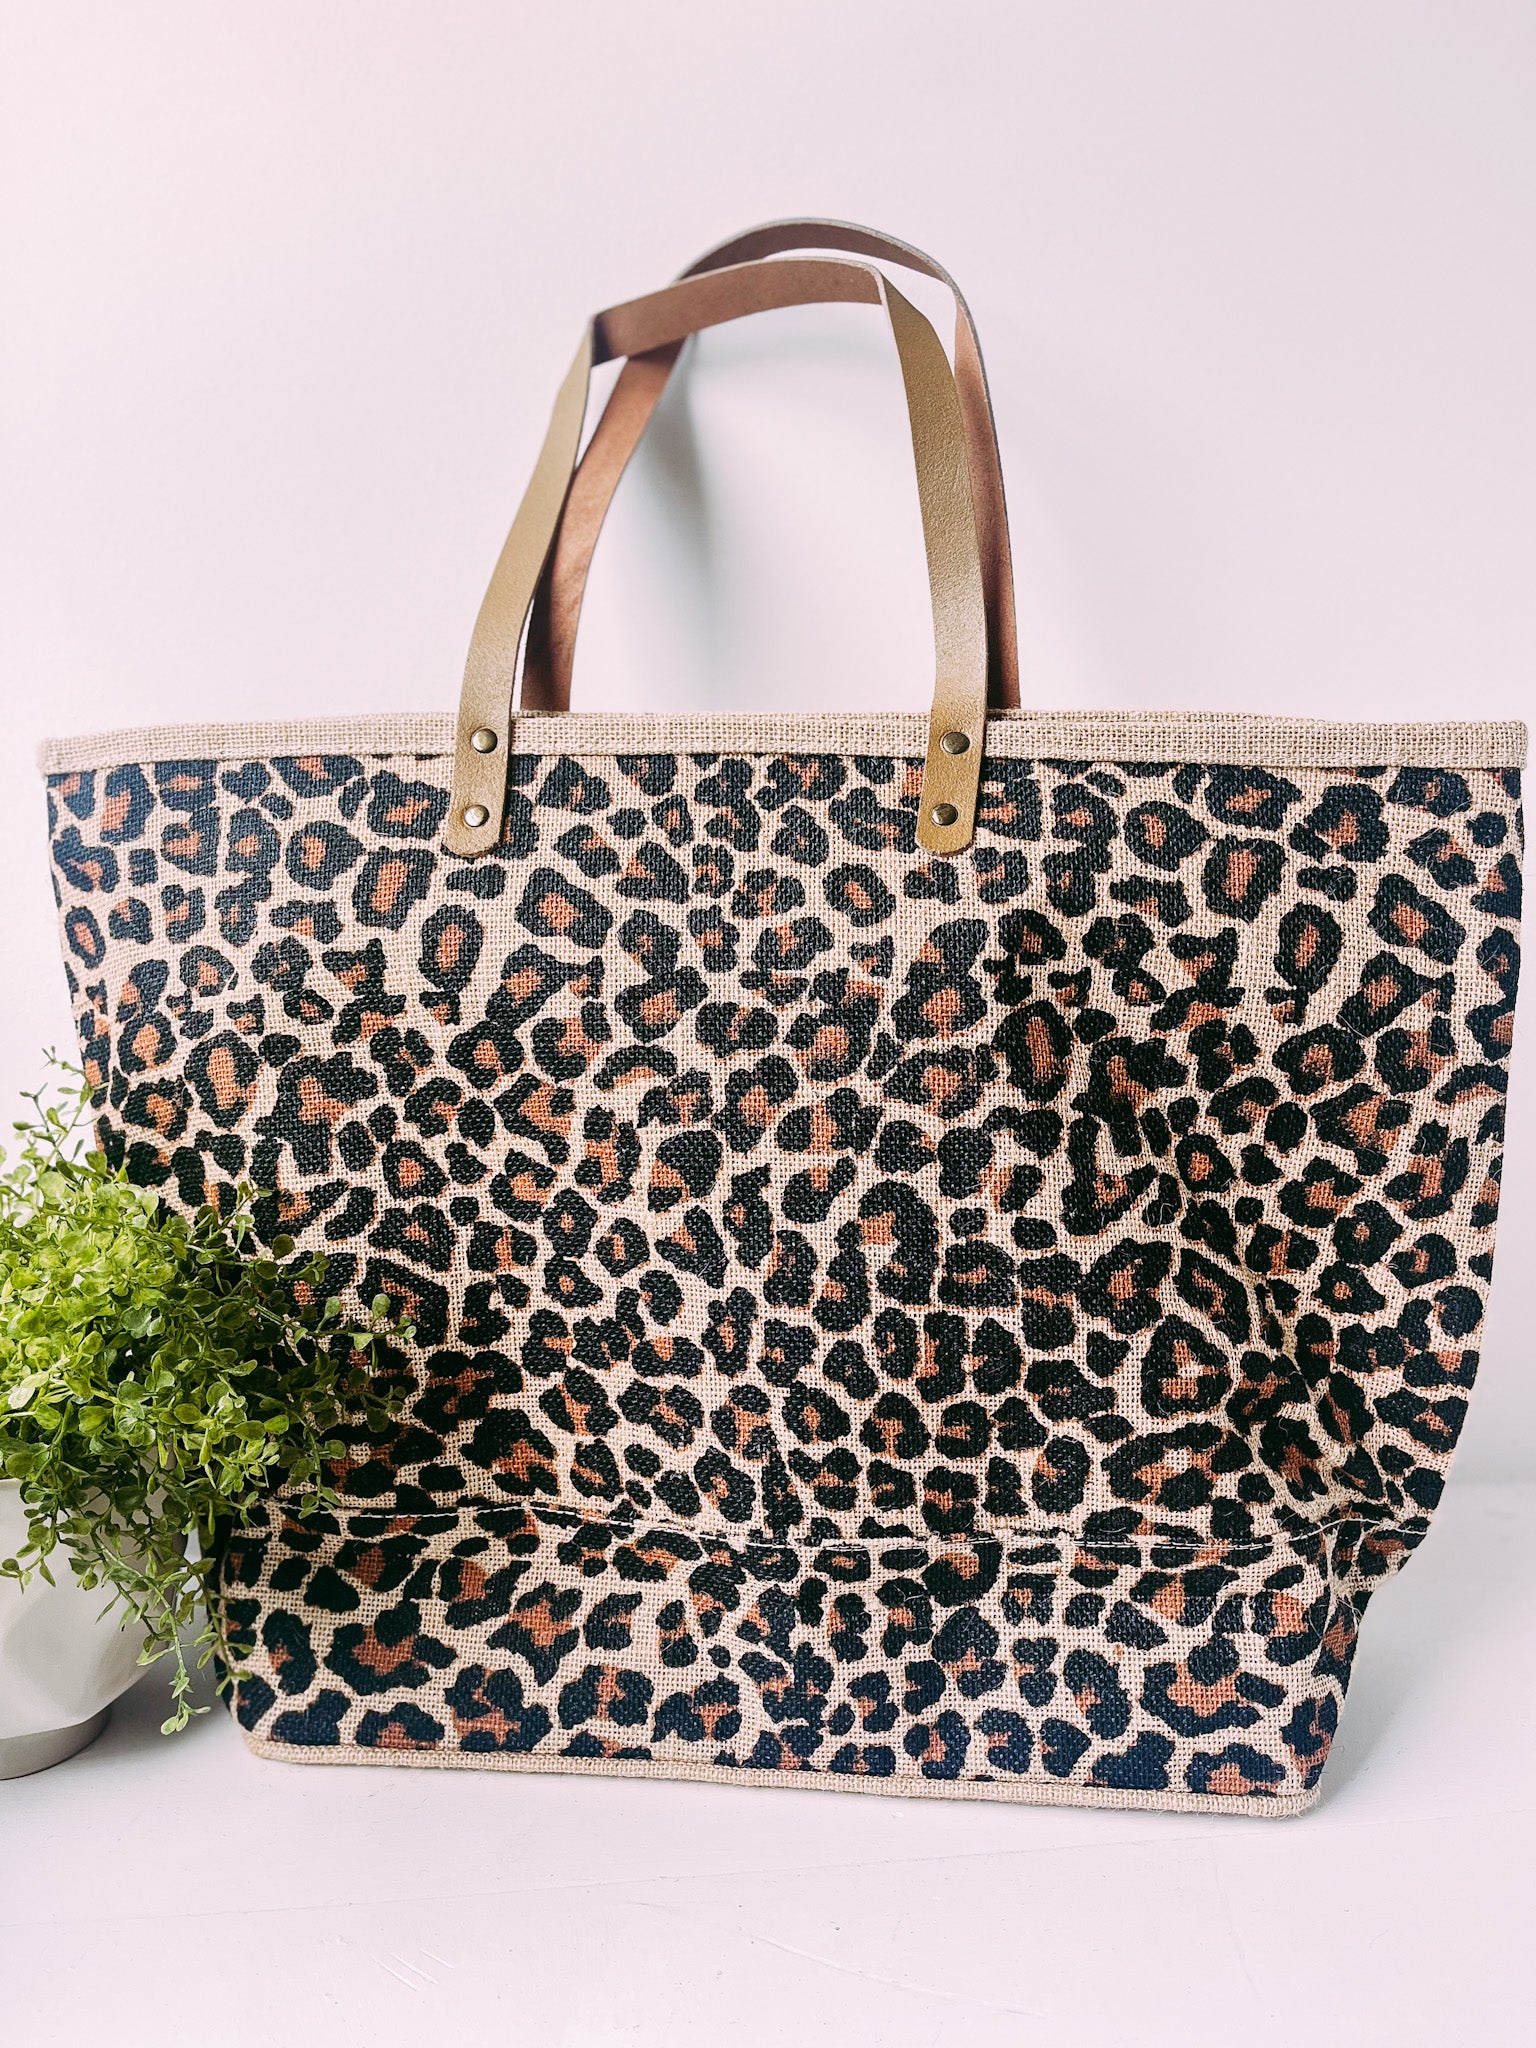 Sienna Crossbody Bag in Dark Taupe with Light Pink Leopard Strap